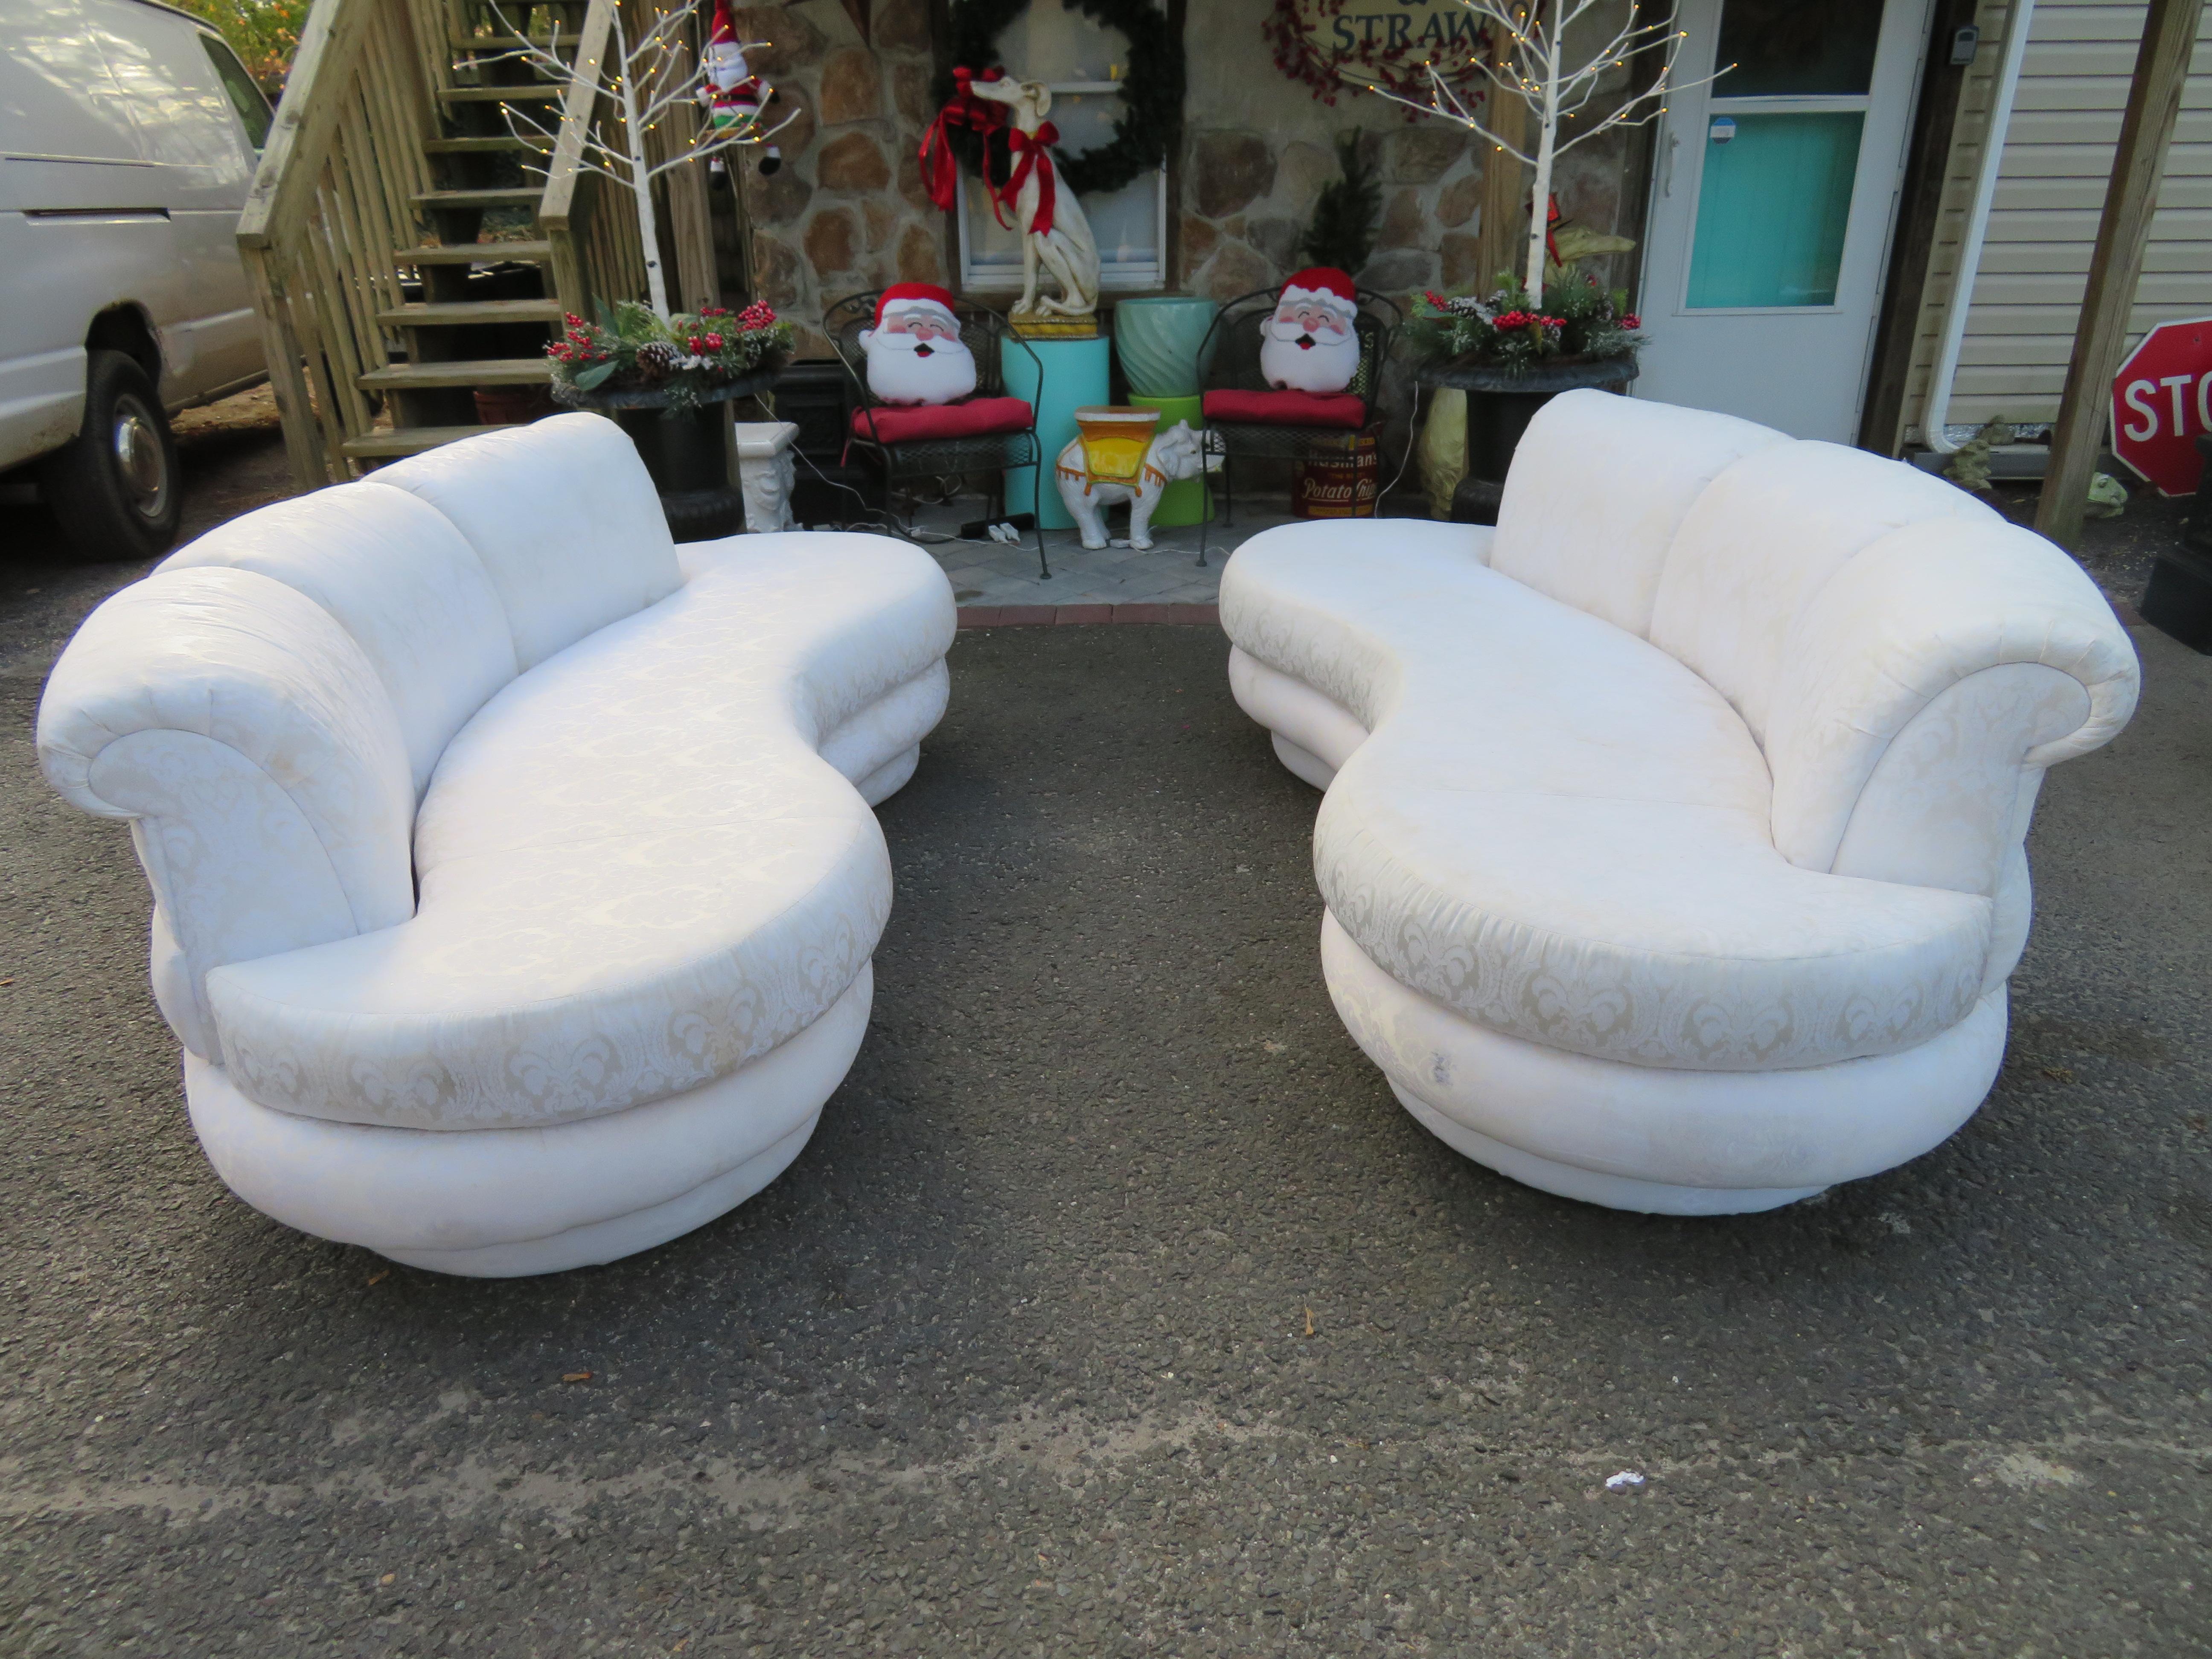 American Stylish Pair Adrian Pearsall Kidney Shaped Curved Sofa Mid-Century Modern